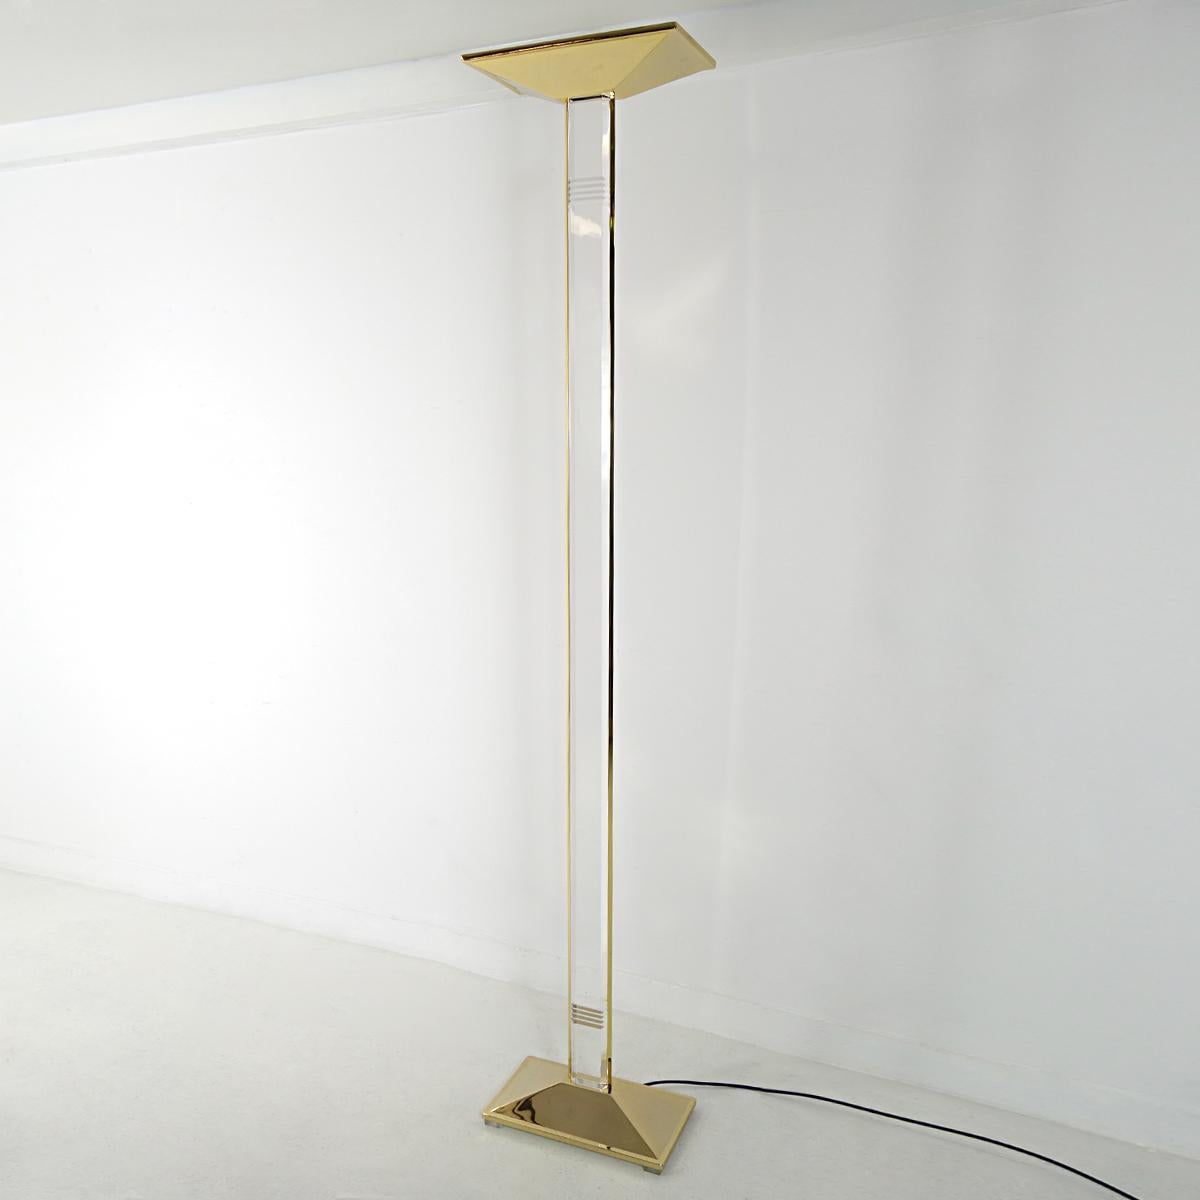 This elegant and classy floor lamp is made of brass and plexiglass. The shade, foot and sides of the pole are made of brass whereas the pole itself and the small stands the foot sits on are subtly made of Lucite. Lovely detail are the small 